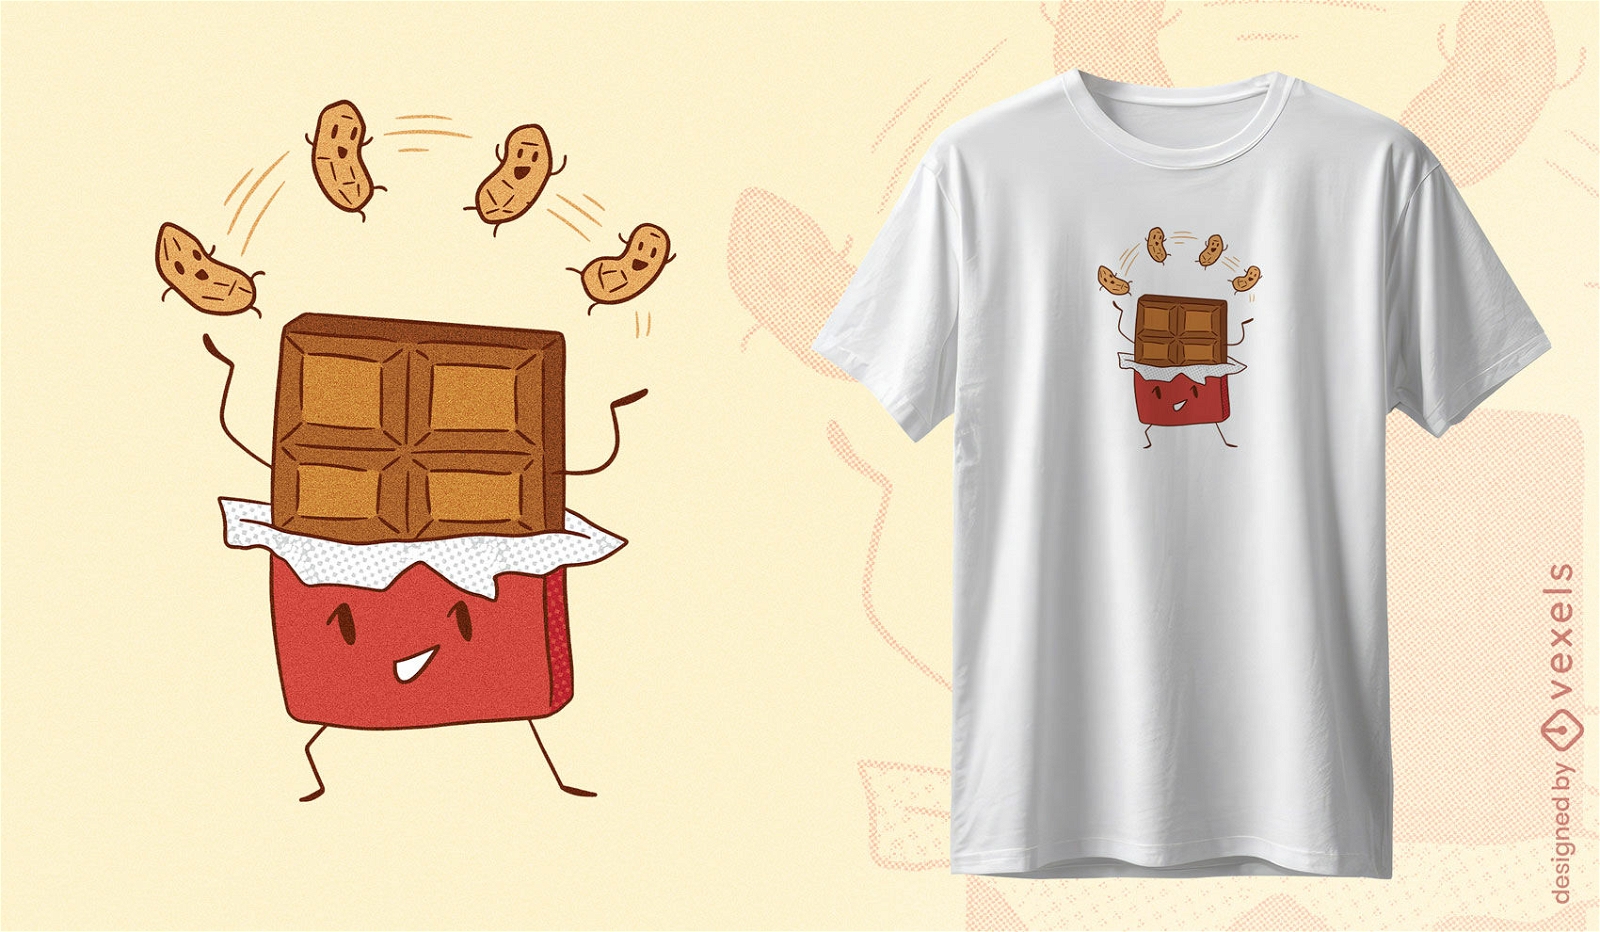 Chocolate and peanuts t-shirt design